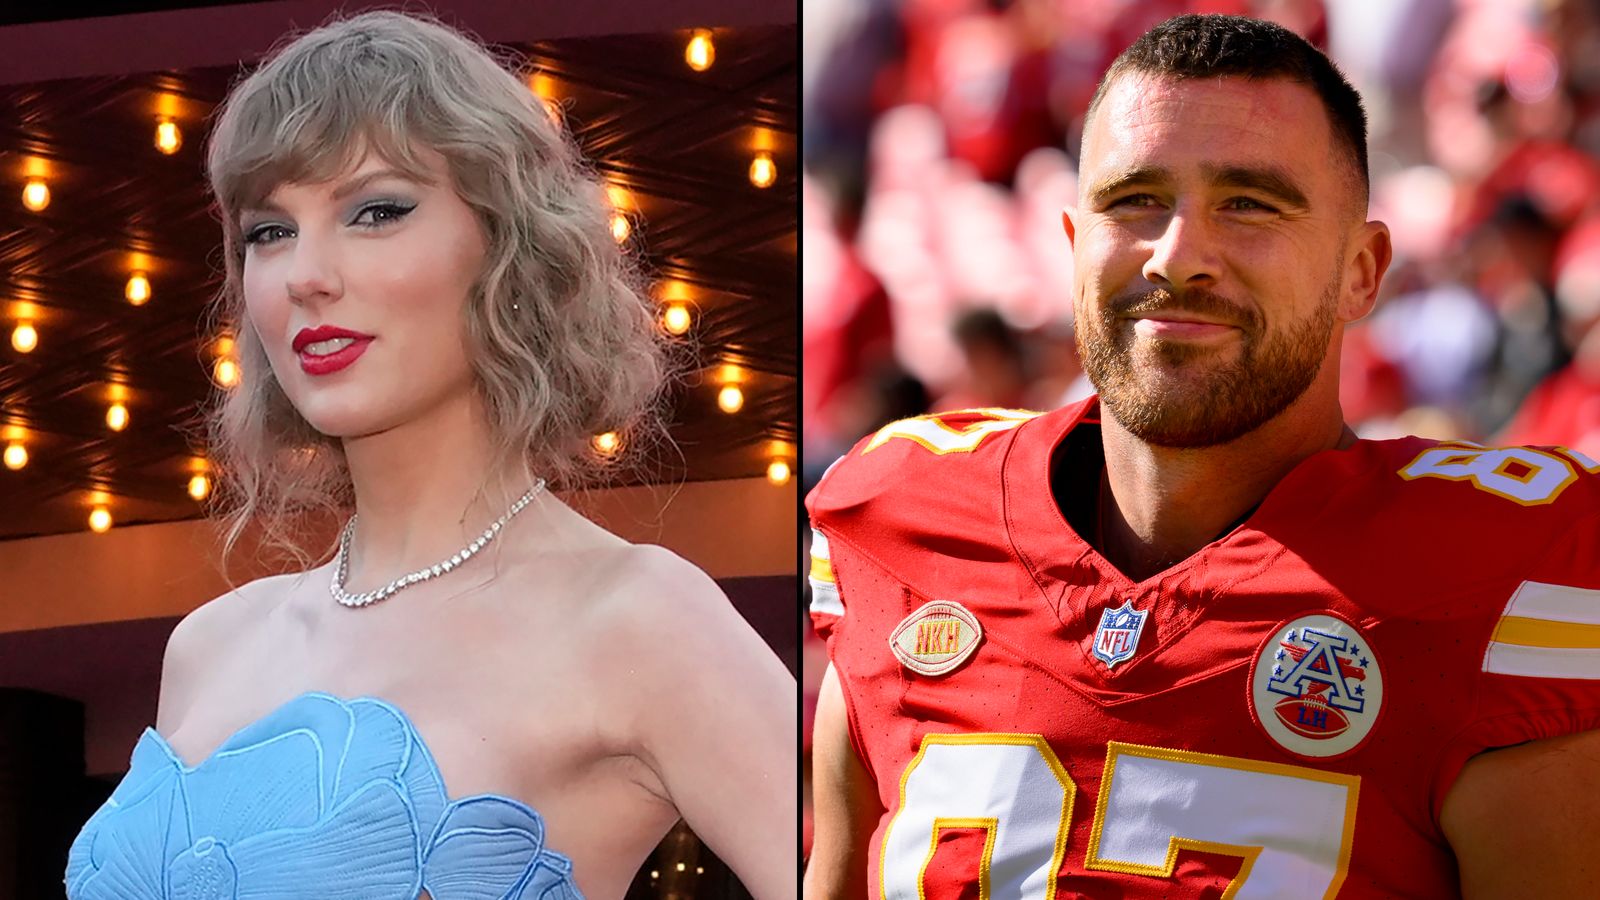 A clue that makes this podcaster think Taylor Swift will be engaged soon